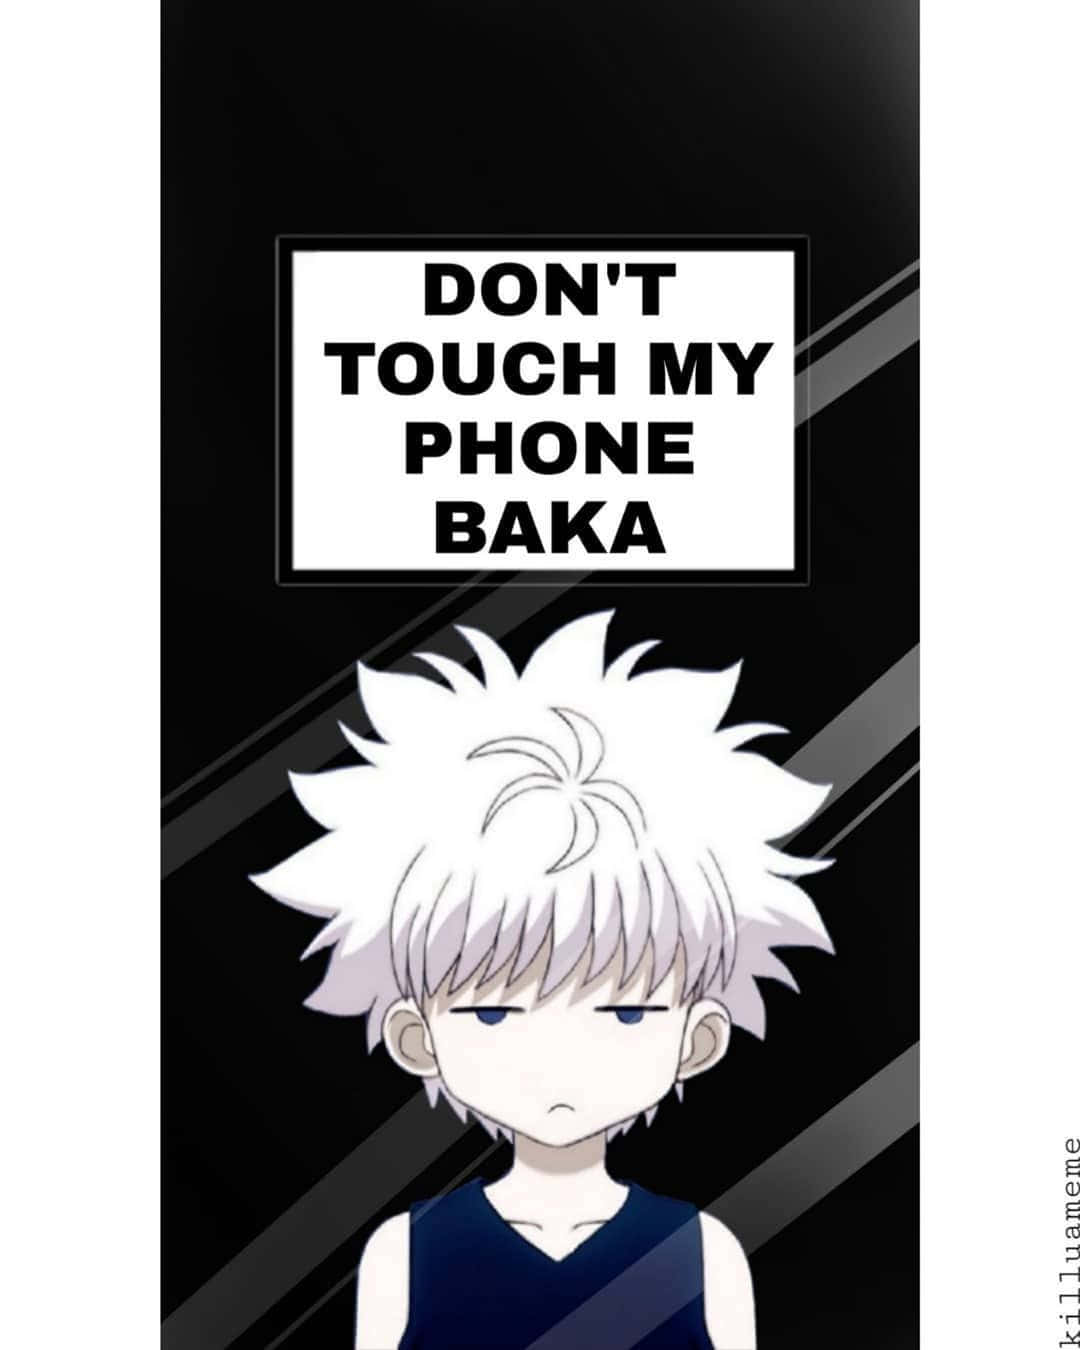 Don't Tempt Fate: Keep Your Hands Off My Phone! Wallpaper